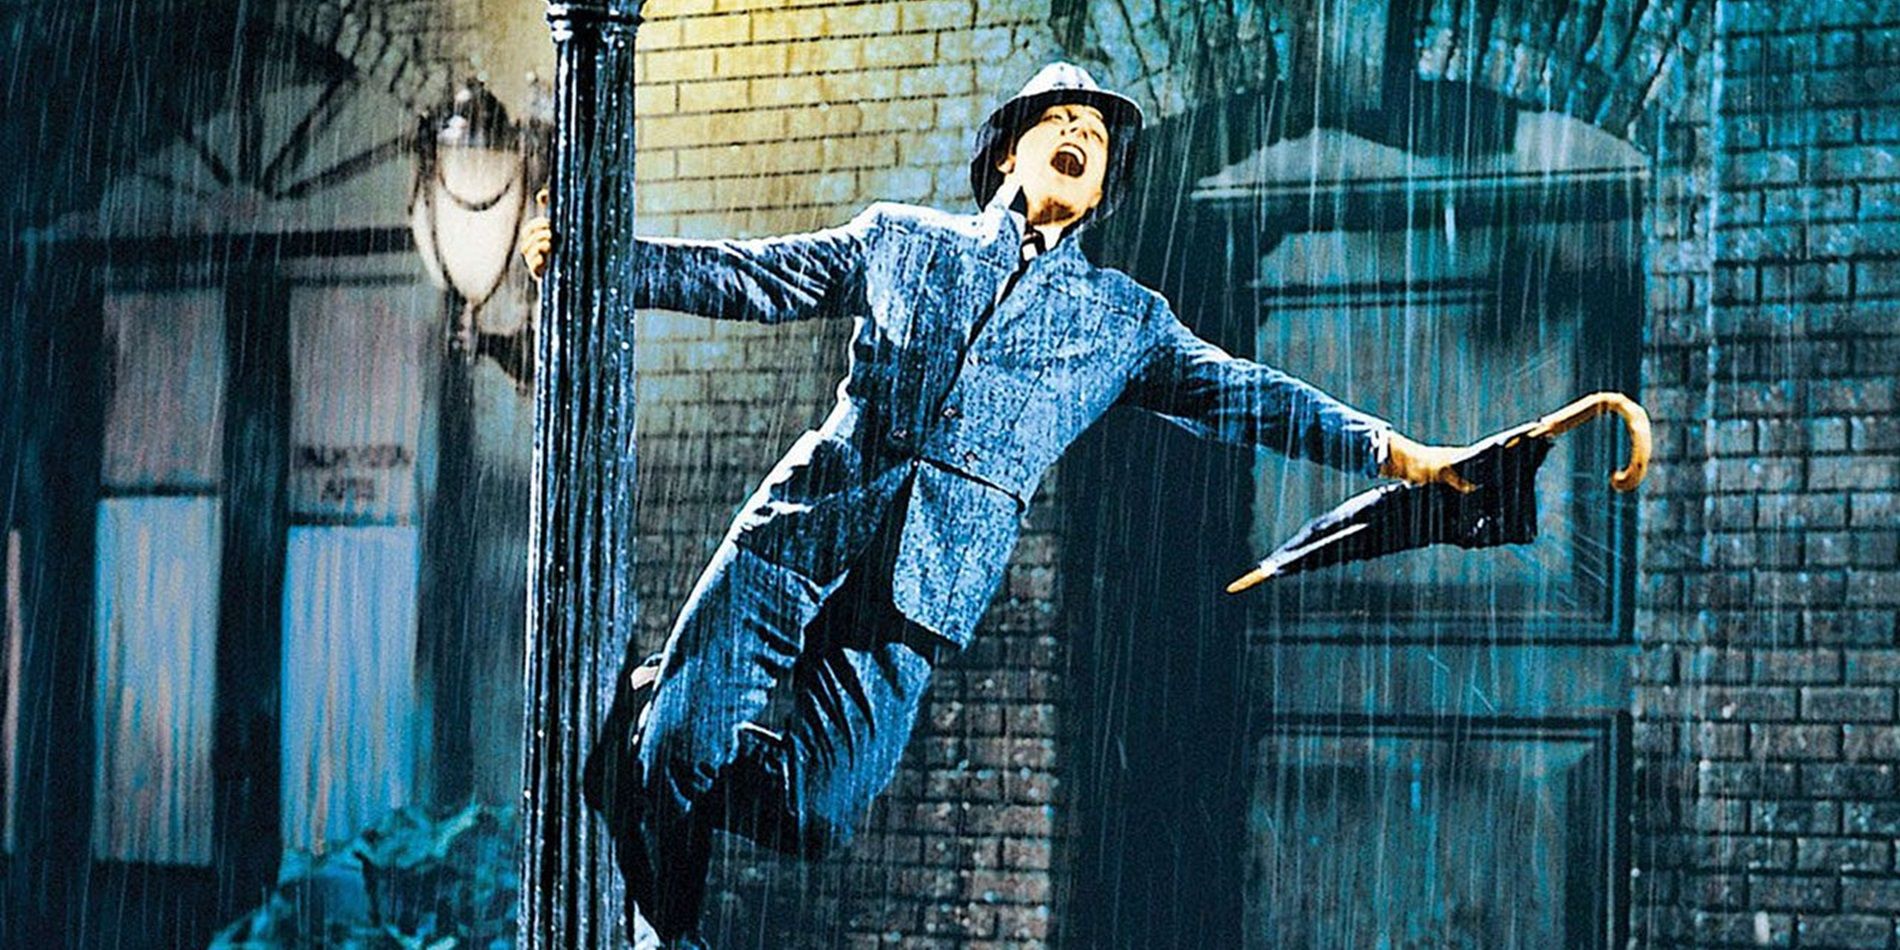 Gene Kelly as Don hanging from a lamppost in Singin' in the Rain